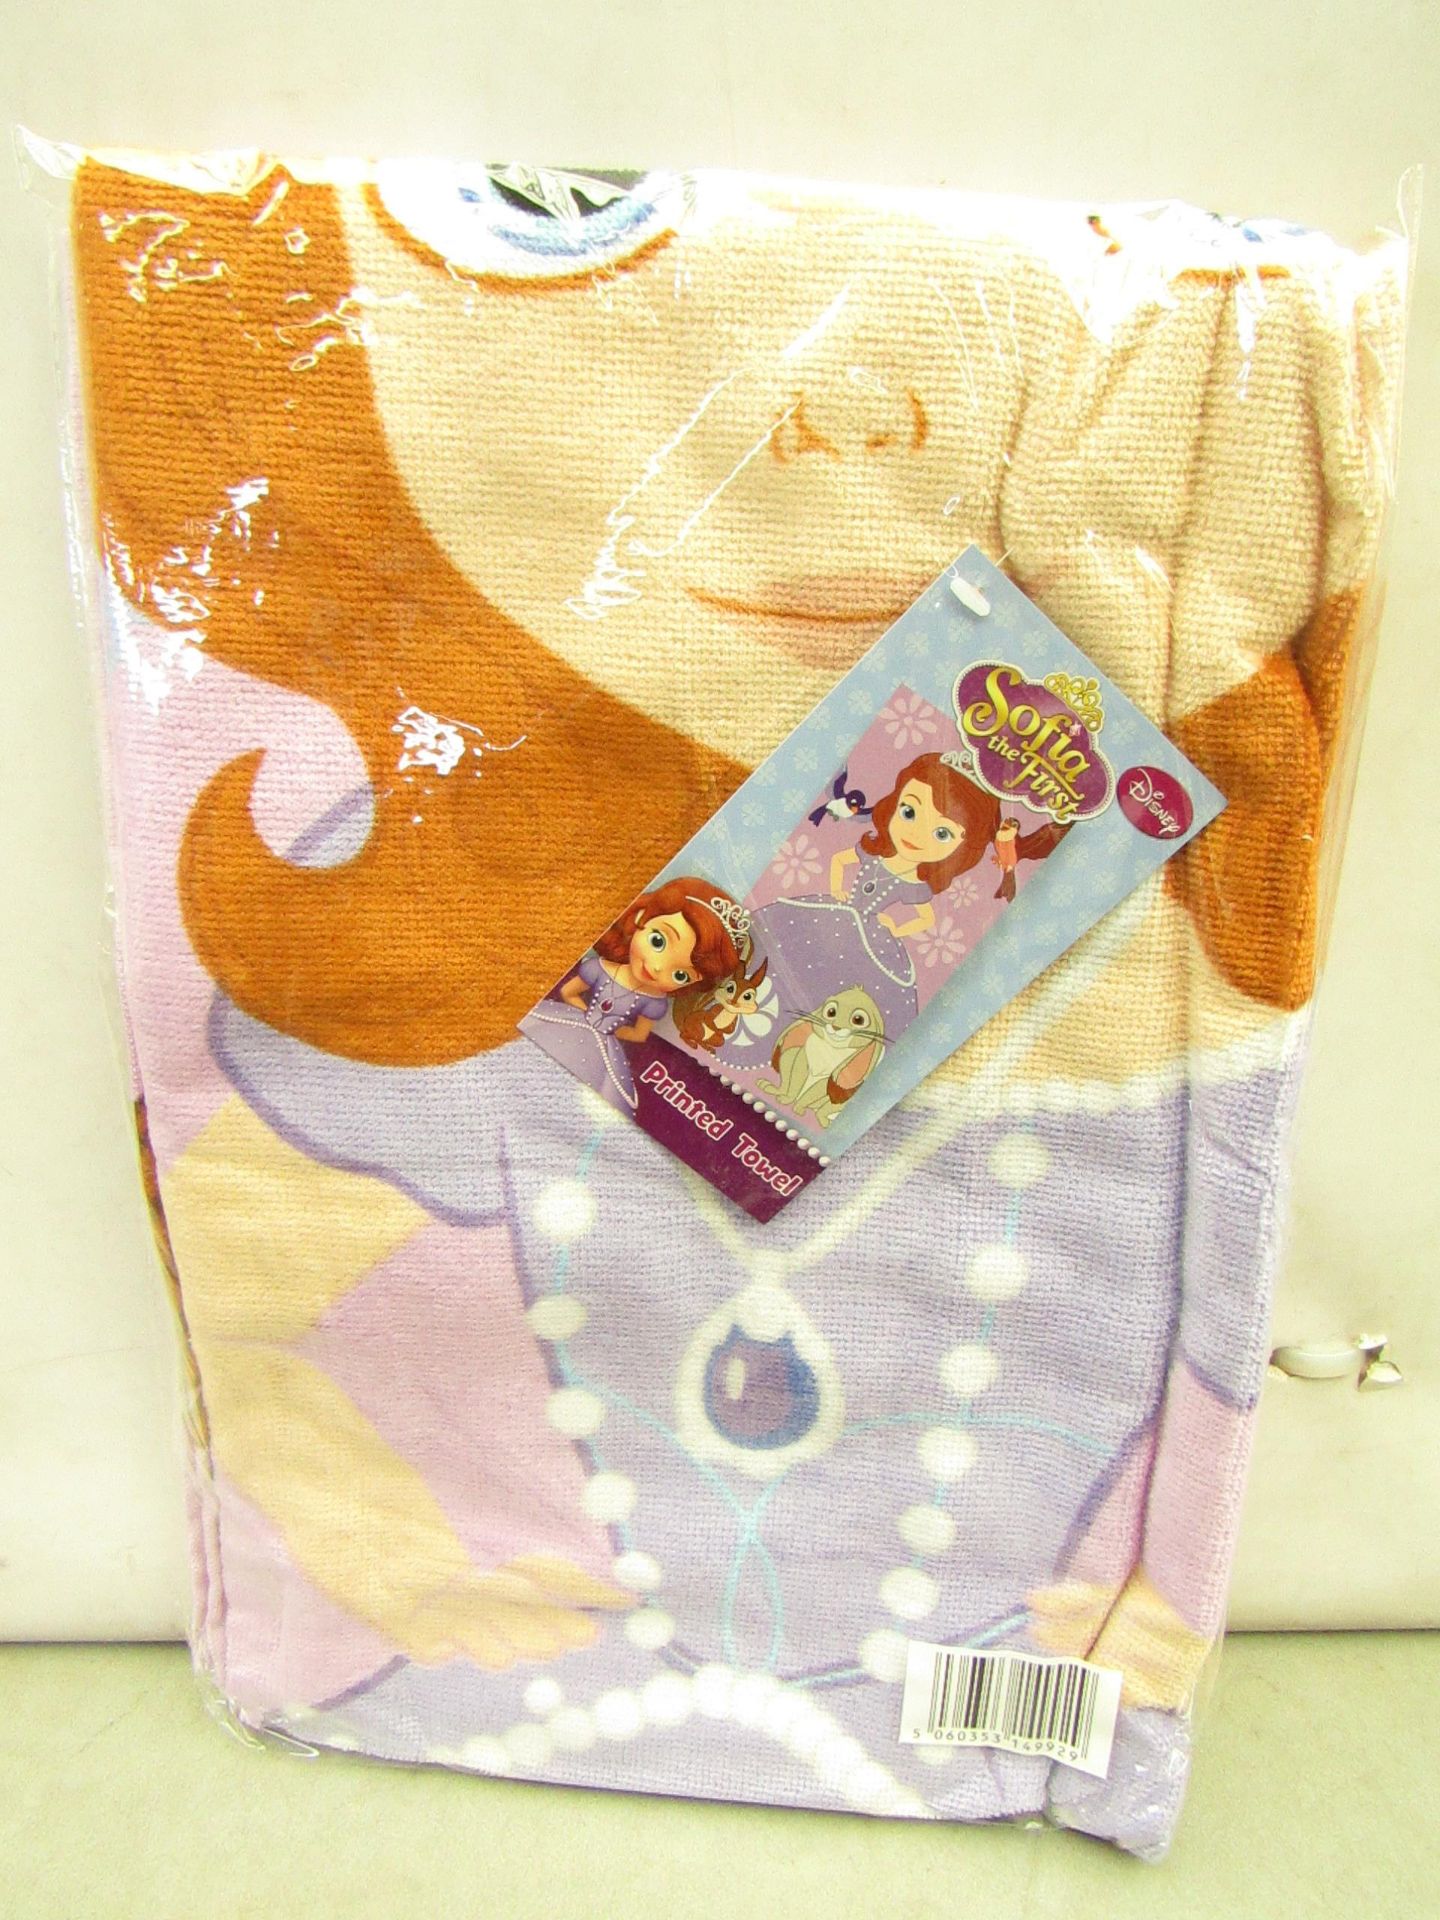 2 x Sofia the First Printed Towels. New & packaged